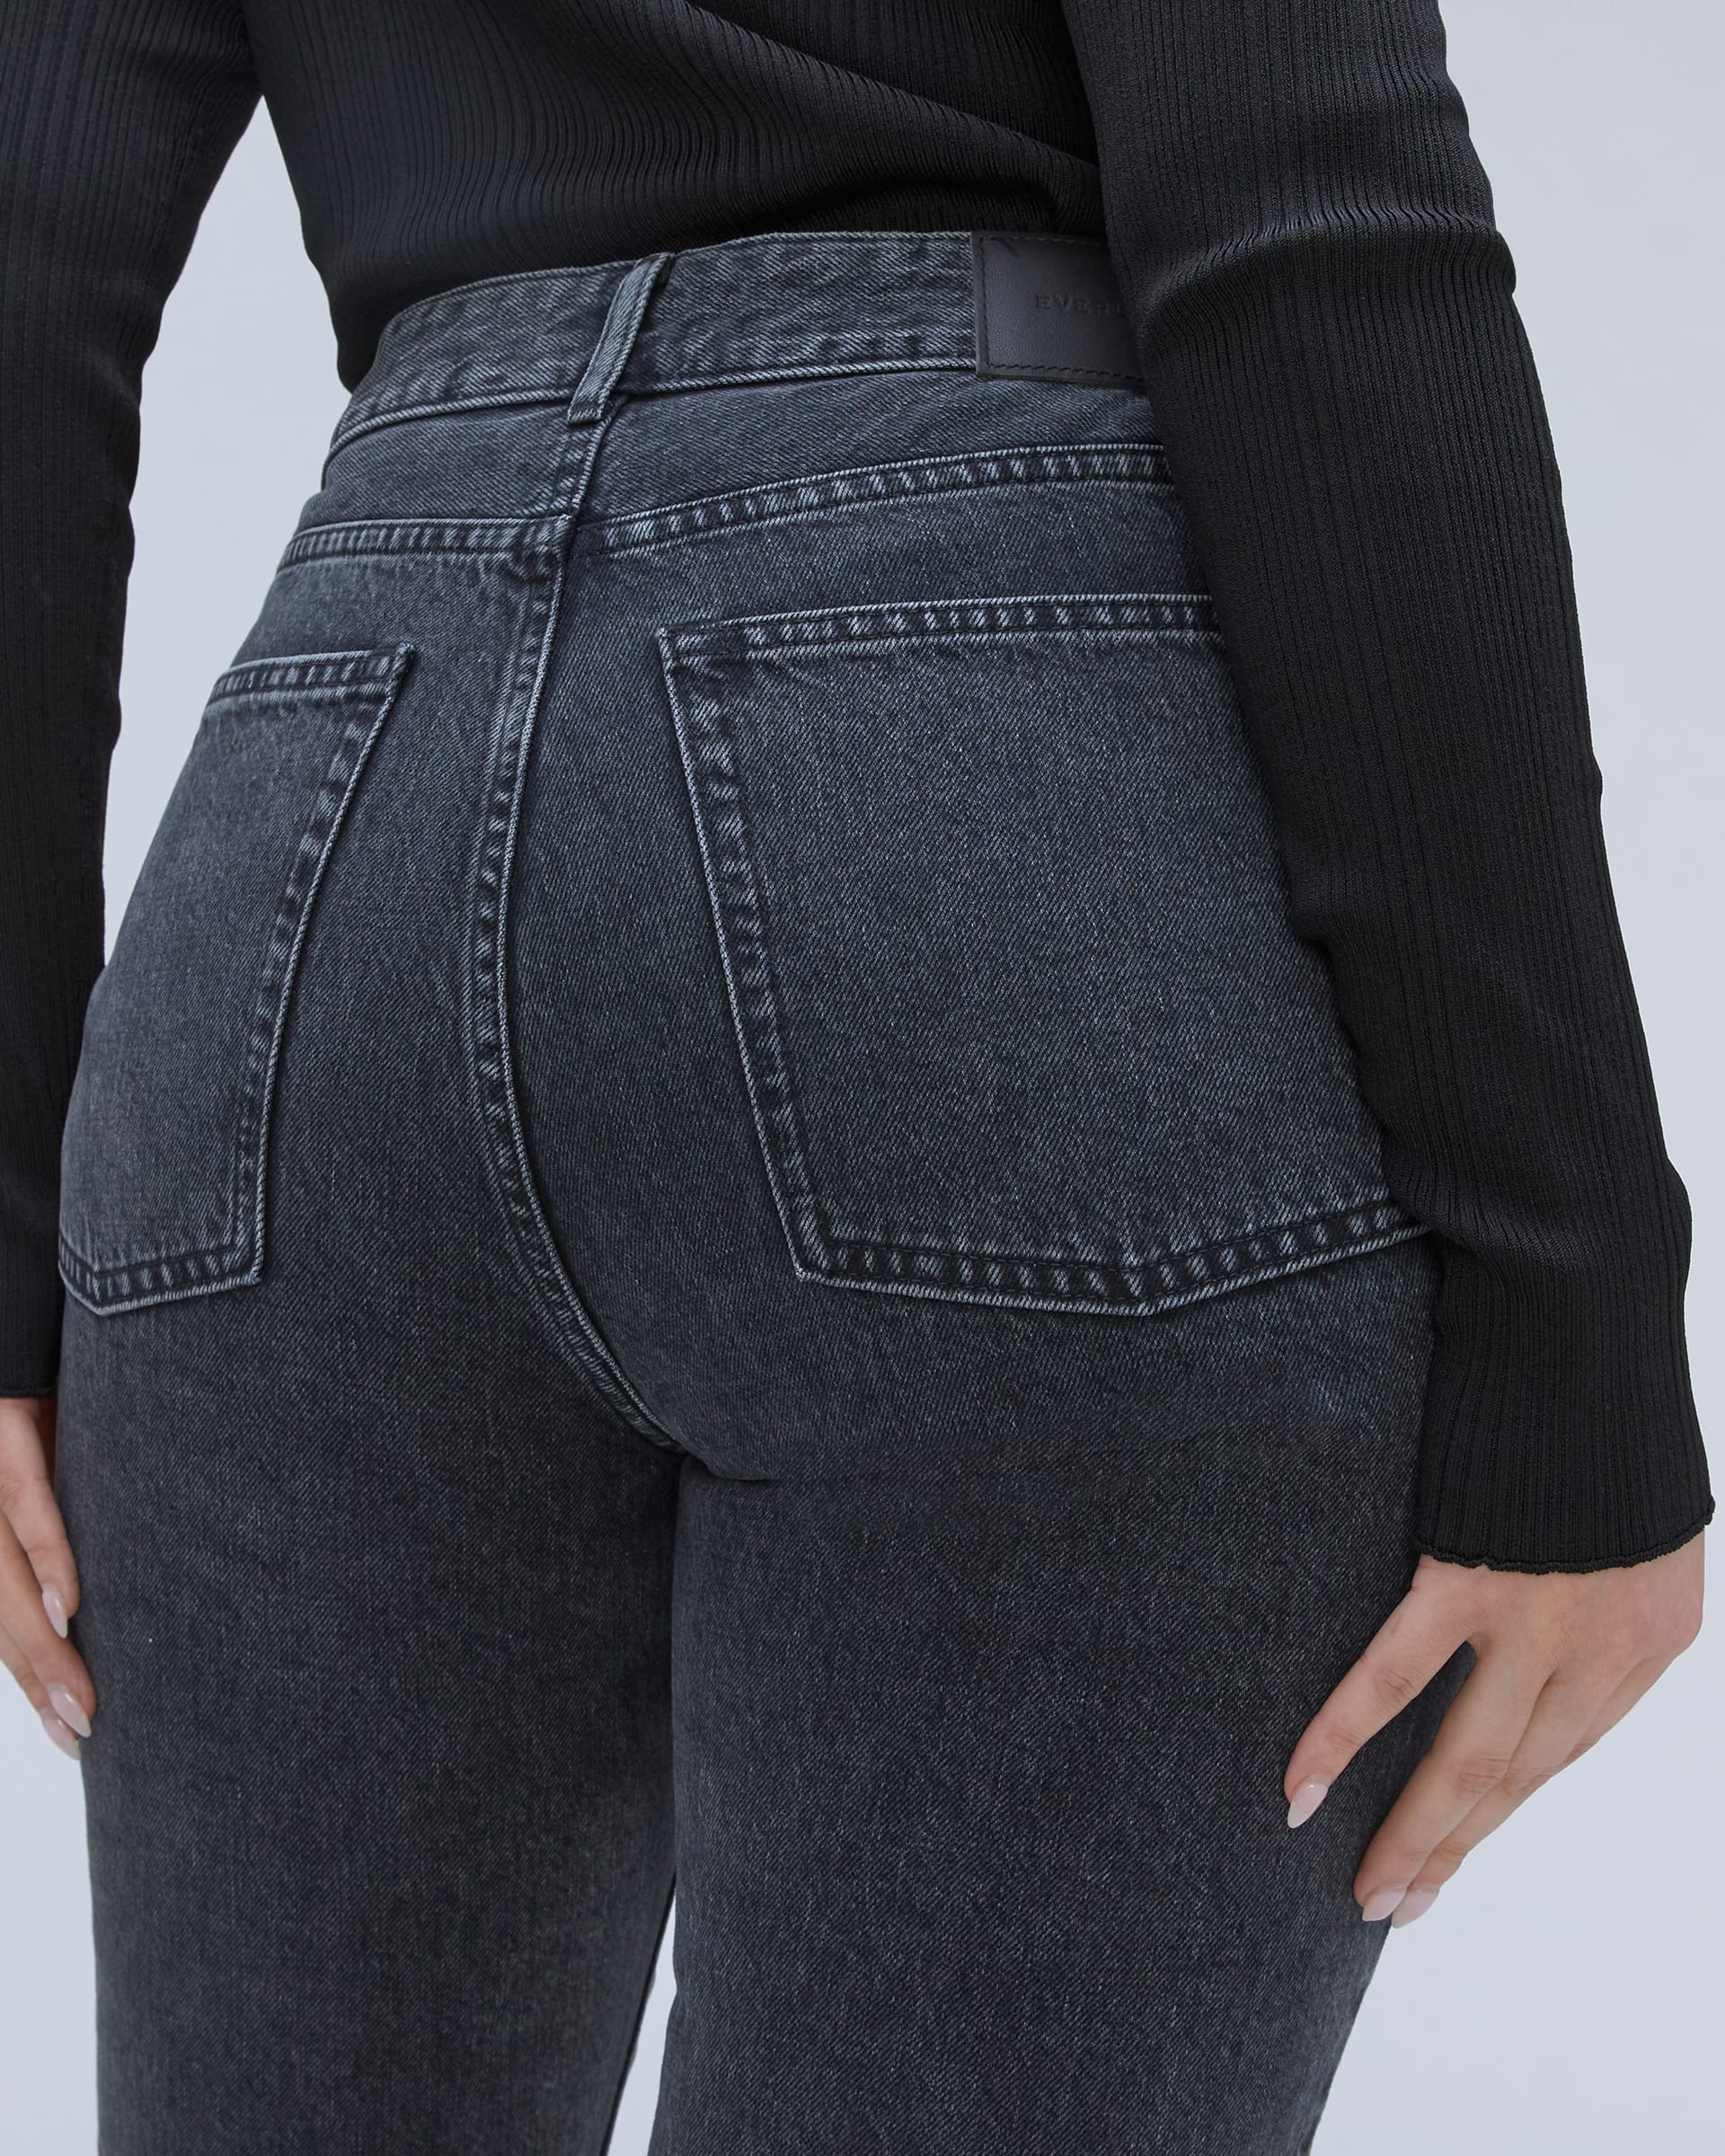 The Curvy ’90s Cheeky® Jean Washed Black – Everlane